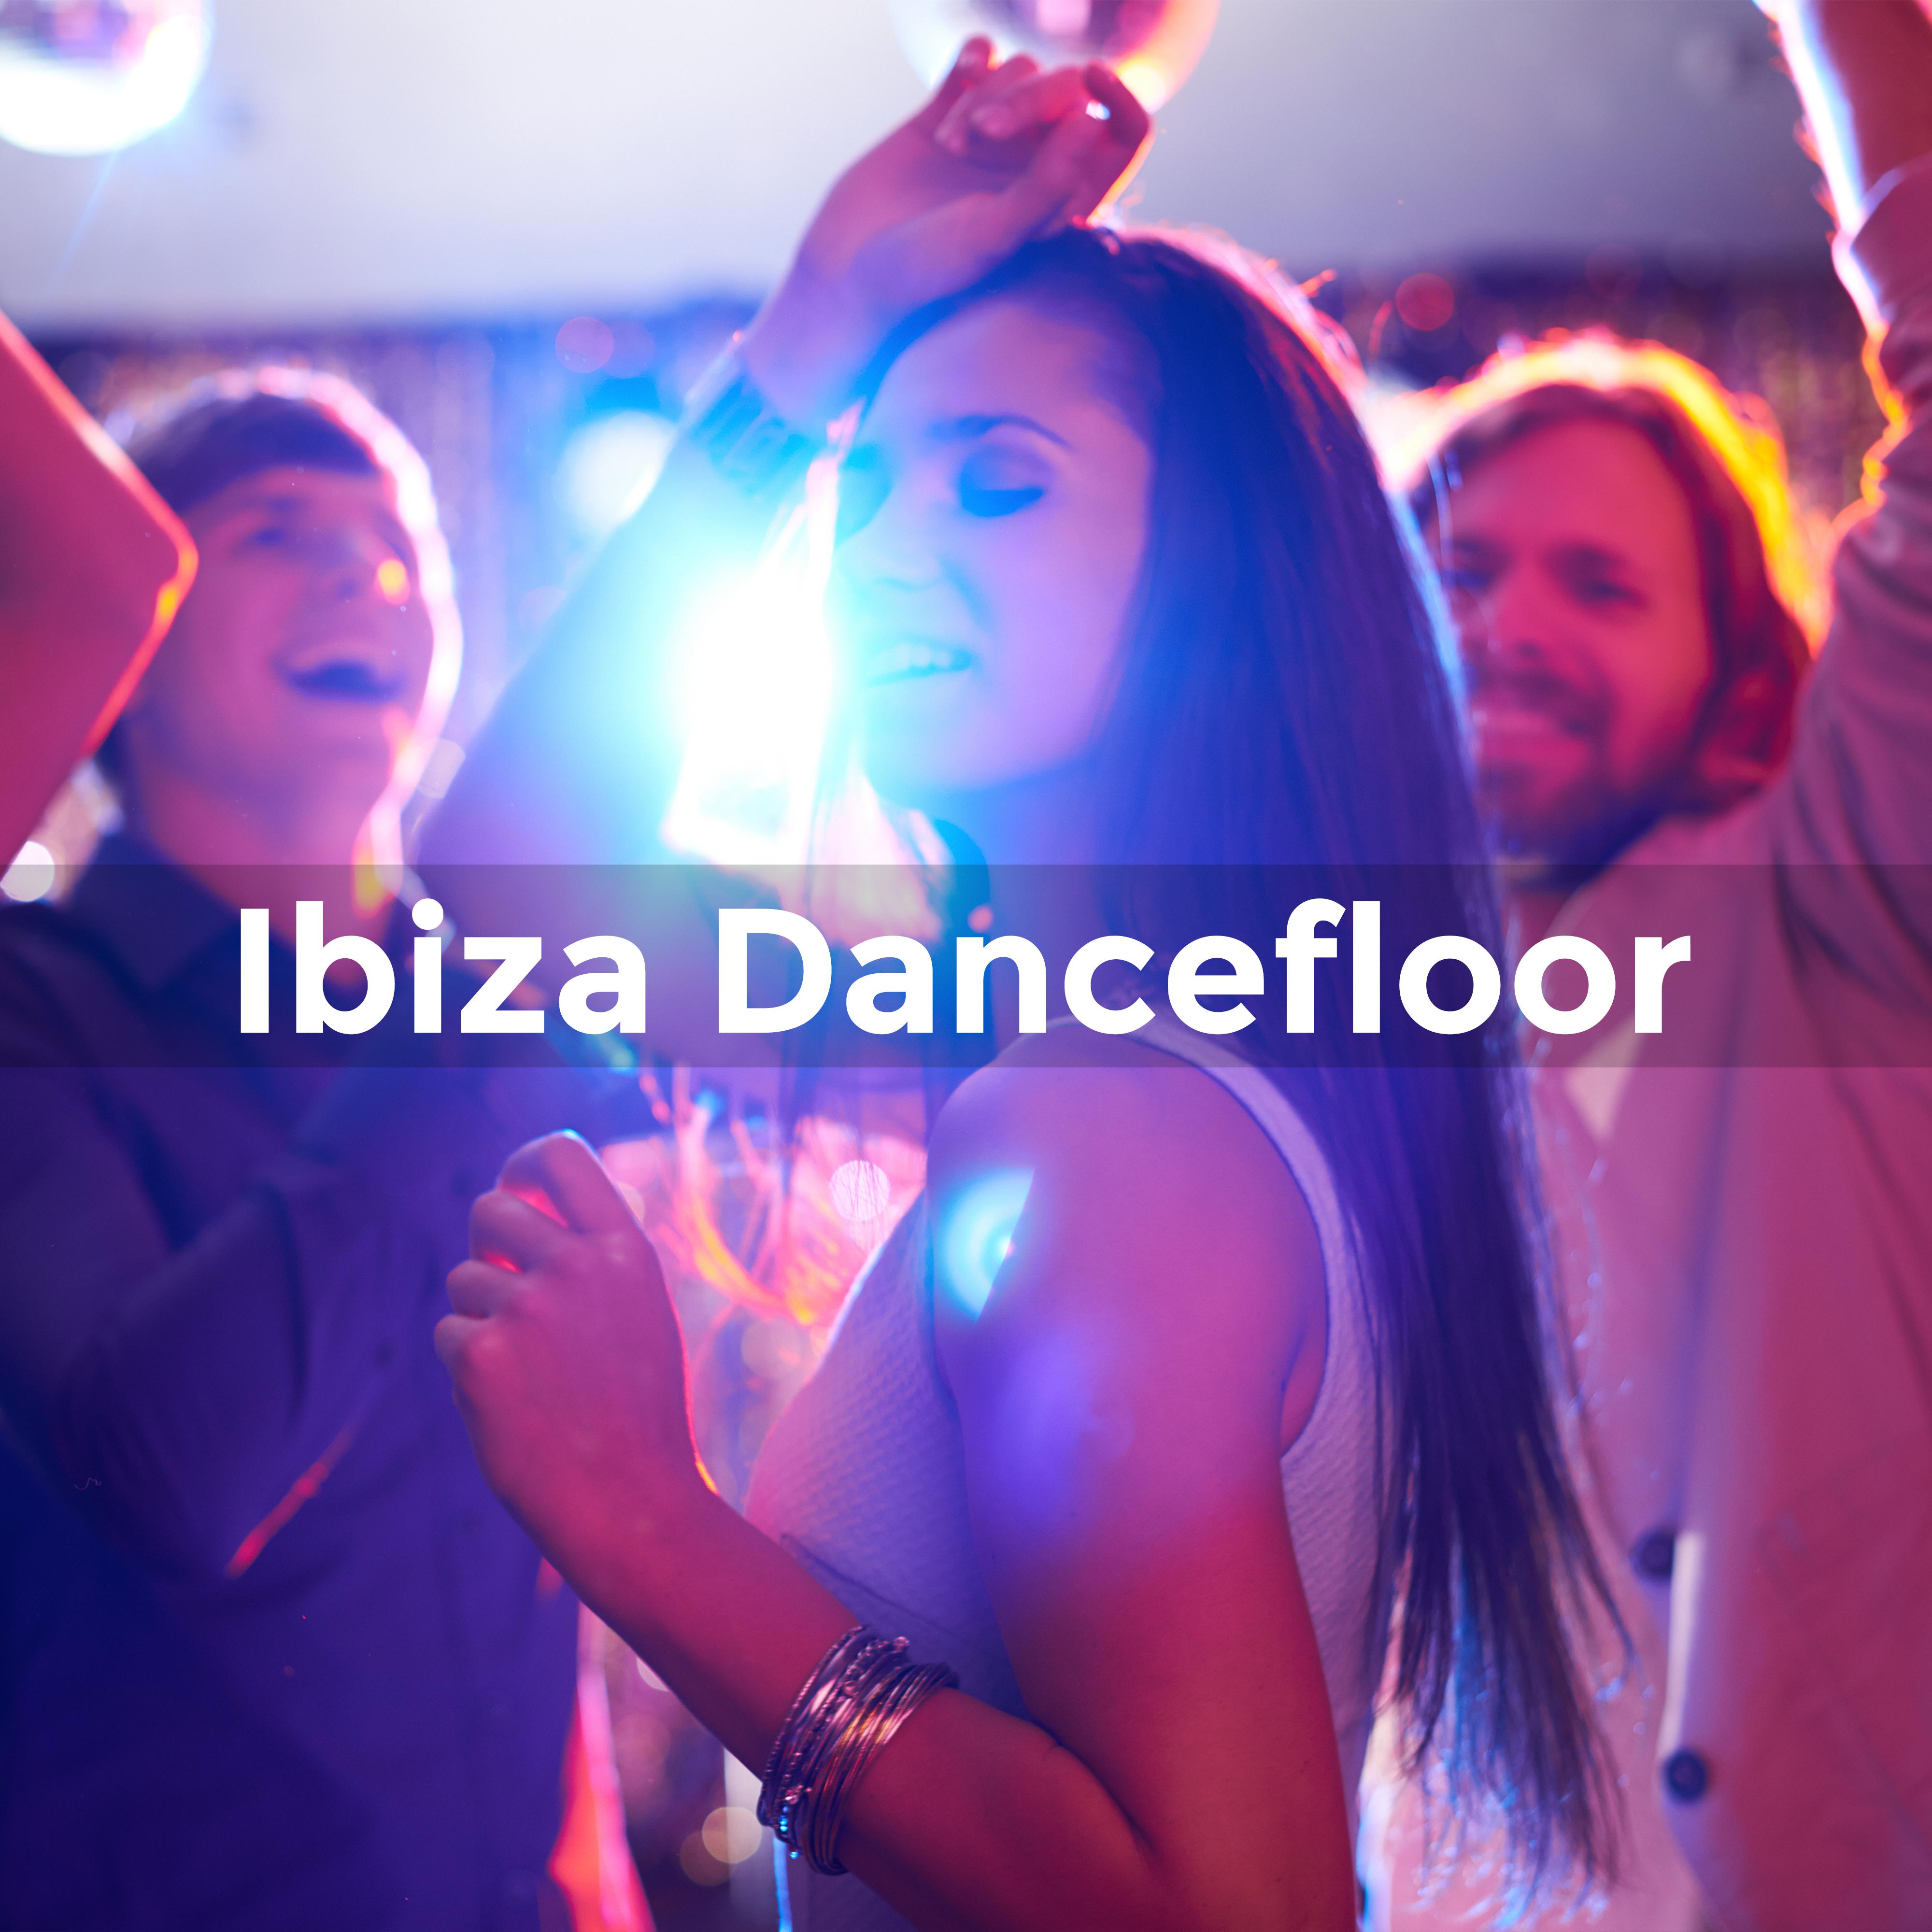 Ibiza Dancefloor - Chill Out 2017, Beach House, Summer Lounge, Relax, Party on The Beach